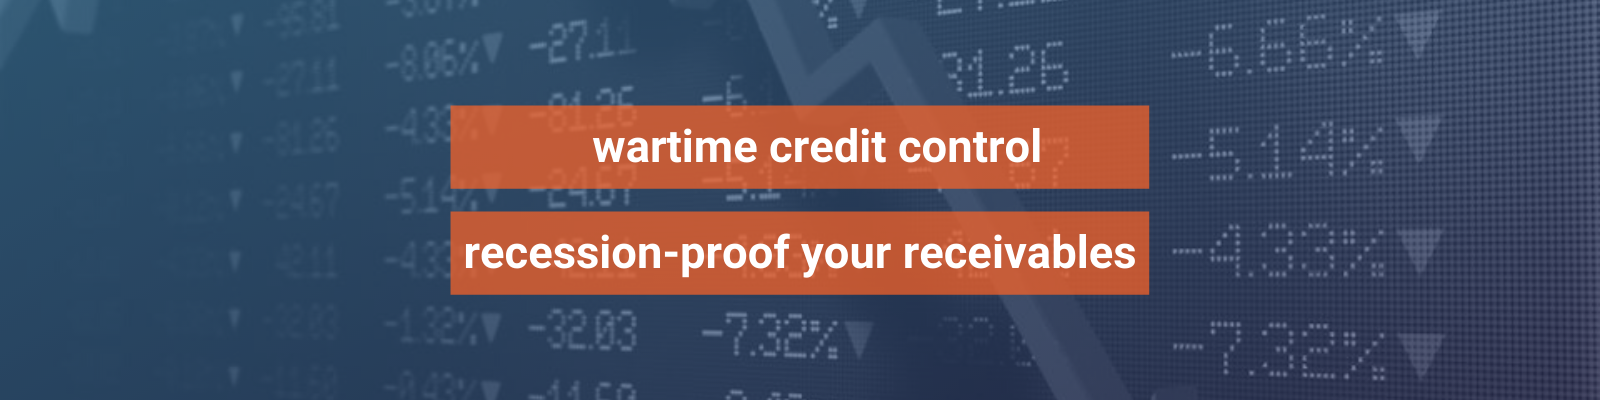 Wartime Credit Control: How to recession-proof your receivables